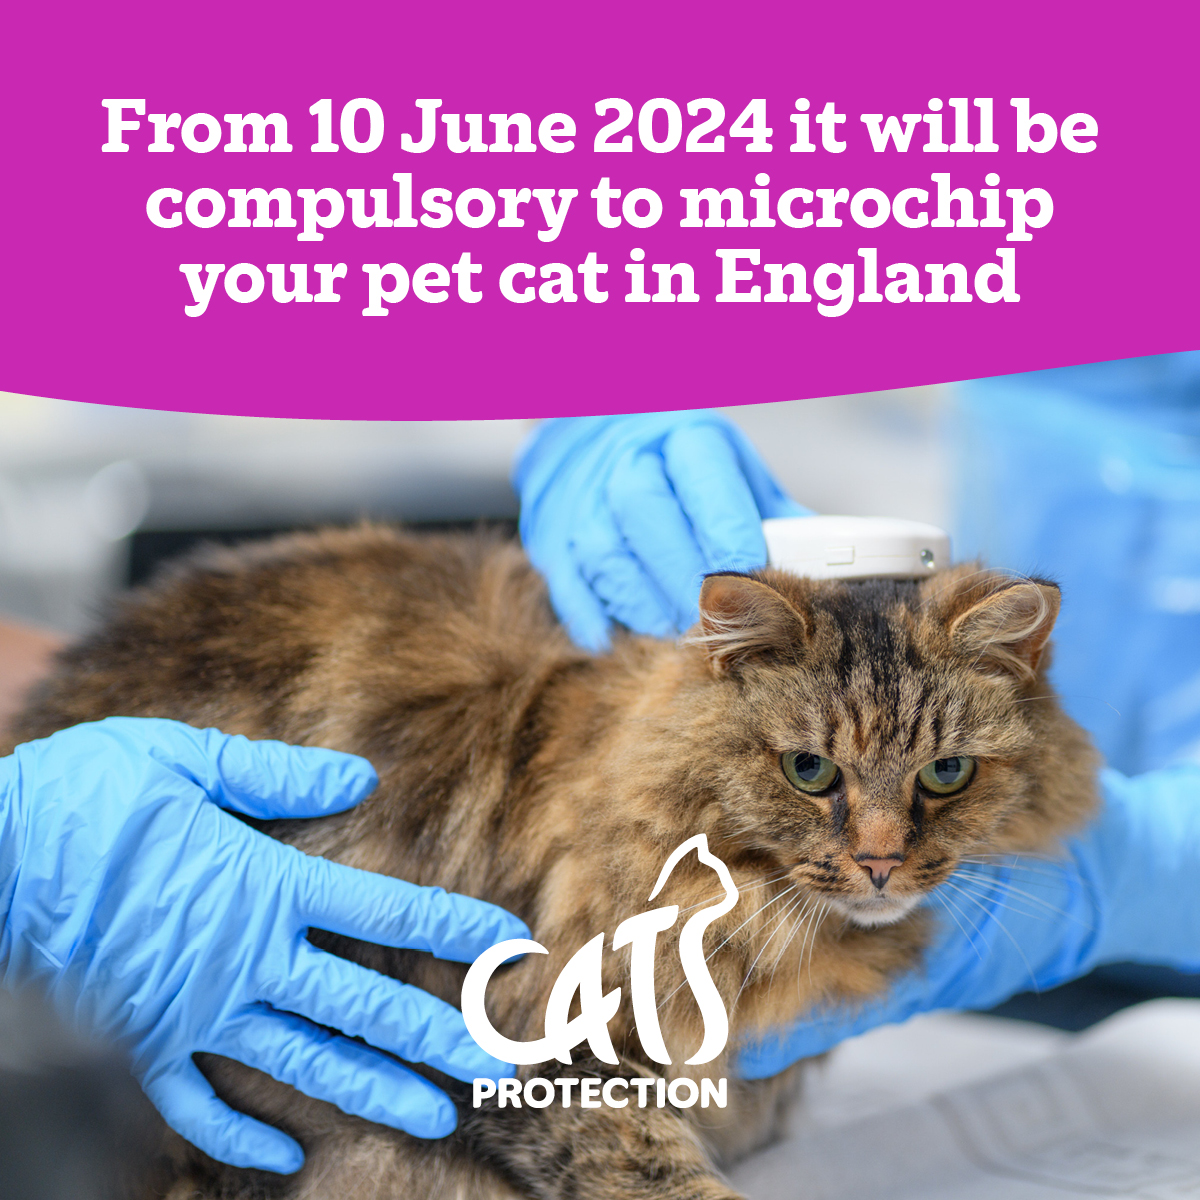 In just over 2 weeks time, it'll become the law in England 🏴󠁧󠁢󠁥󠁮󠁧󠁿 to have your cat microchipped. This safe and effective procedure will significantly increase the chance of reuniting your cat with you if they go missing. #MicrochipsReunite